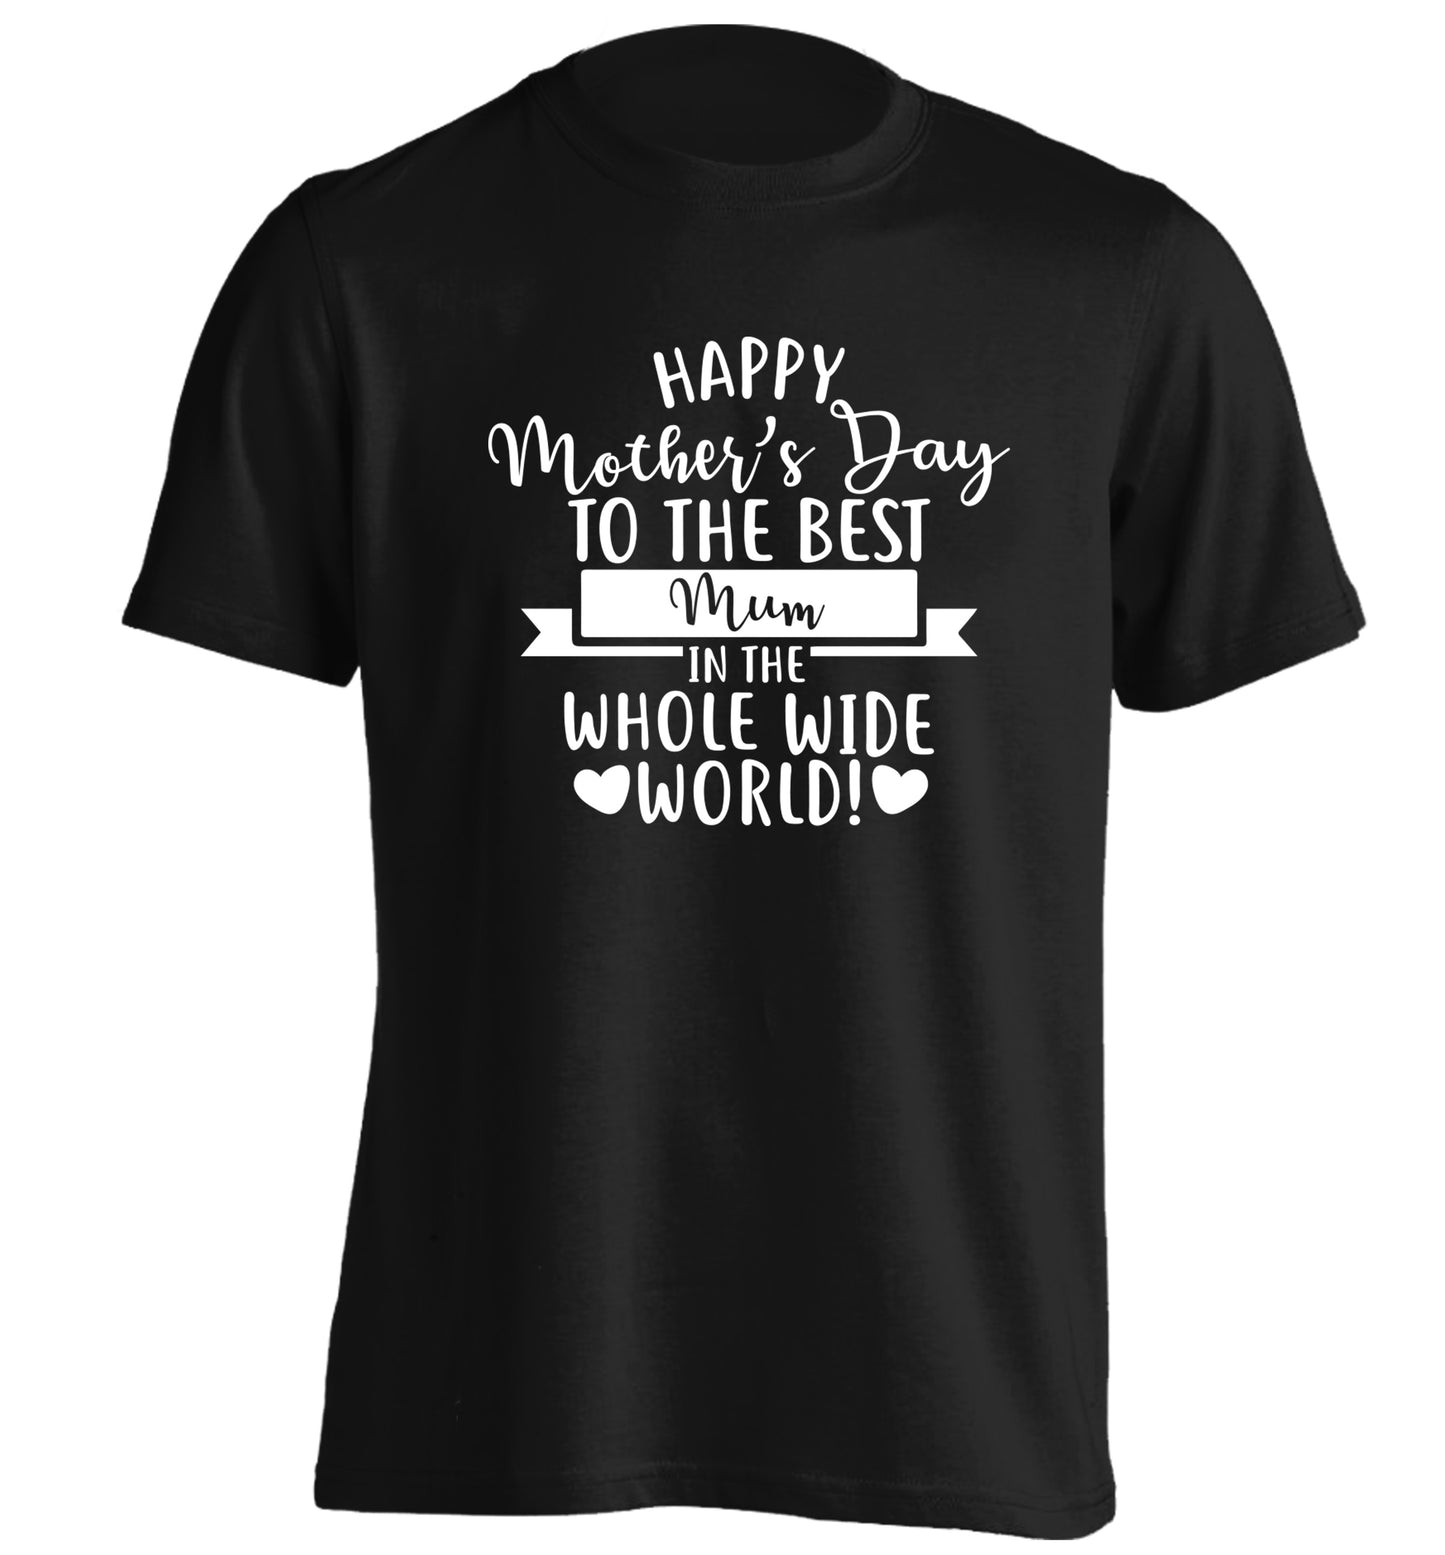 Happy Mother's Day to the best mum in the whole wide world! adults unisex black Tshirt 2XL